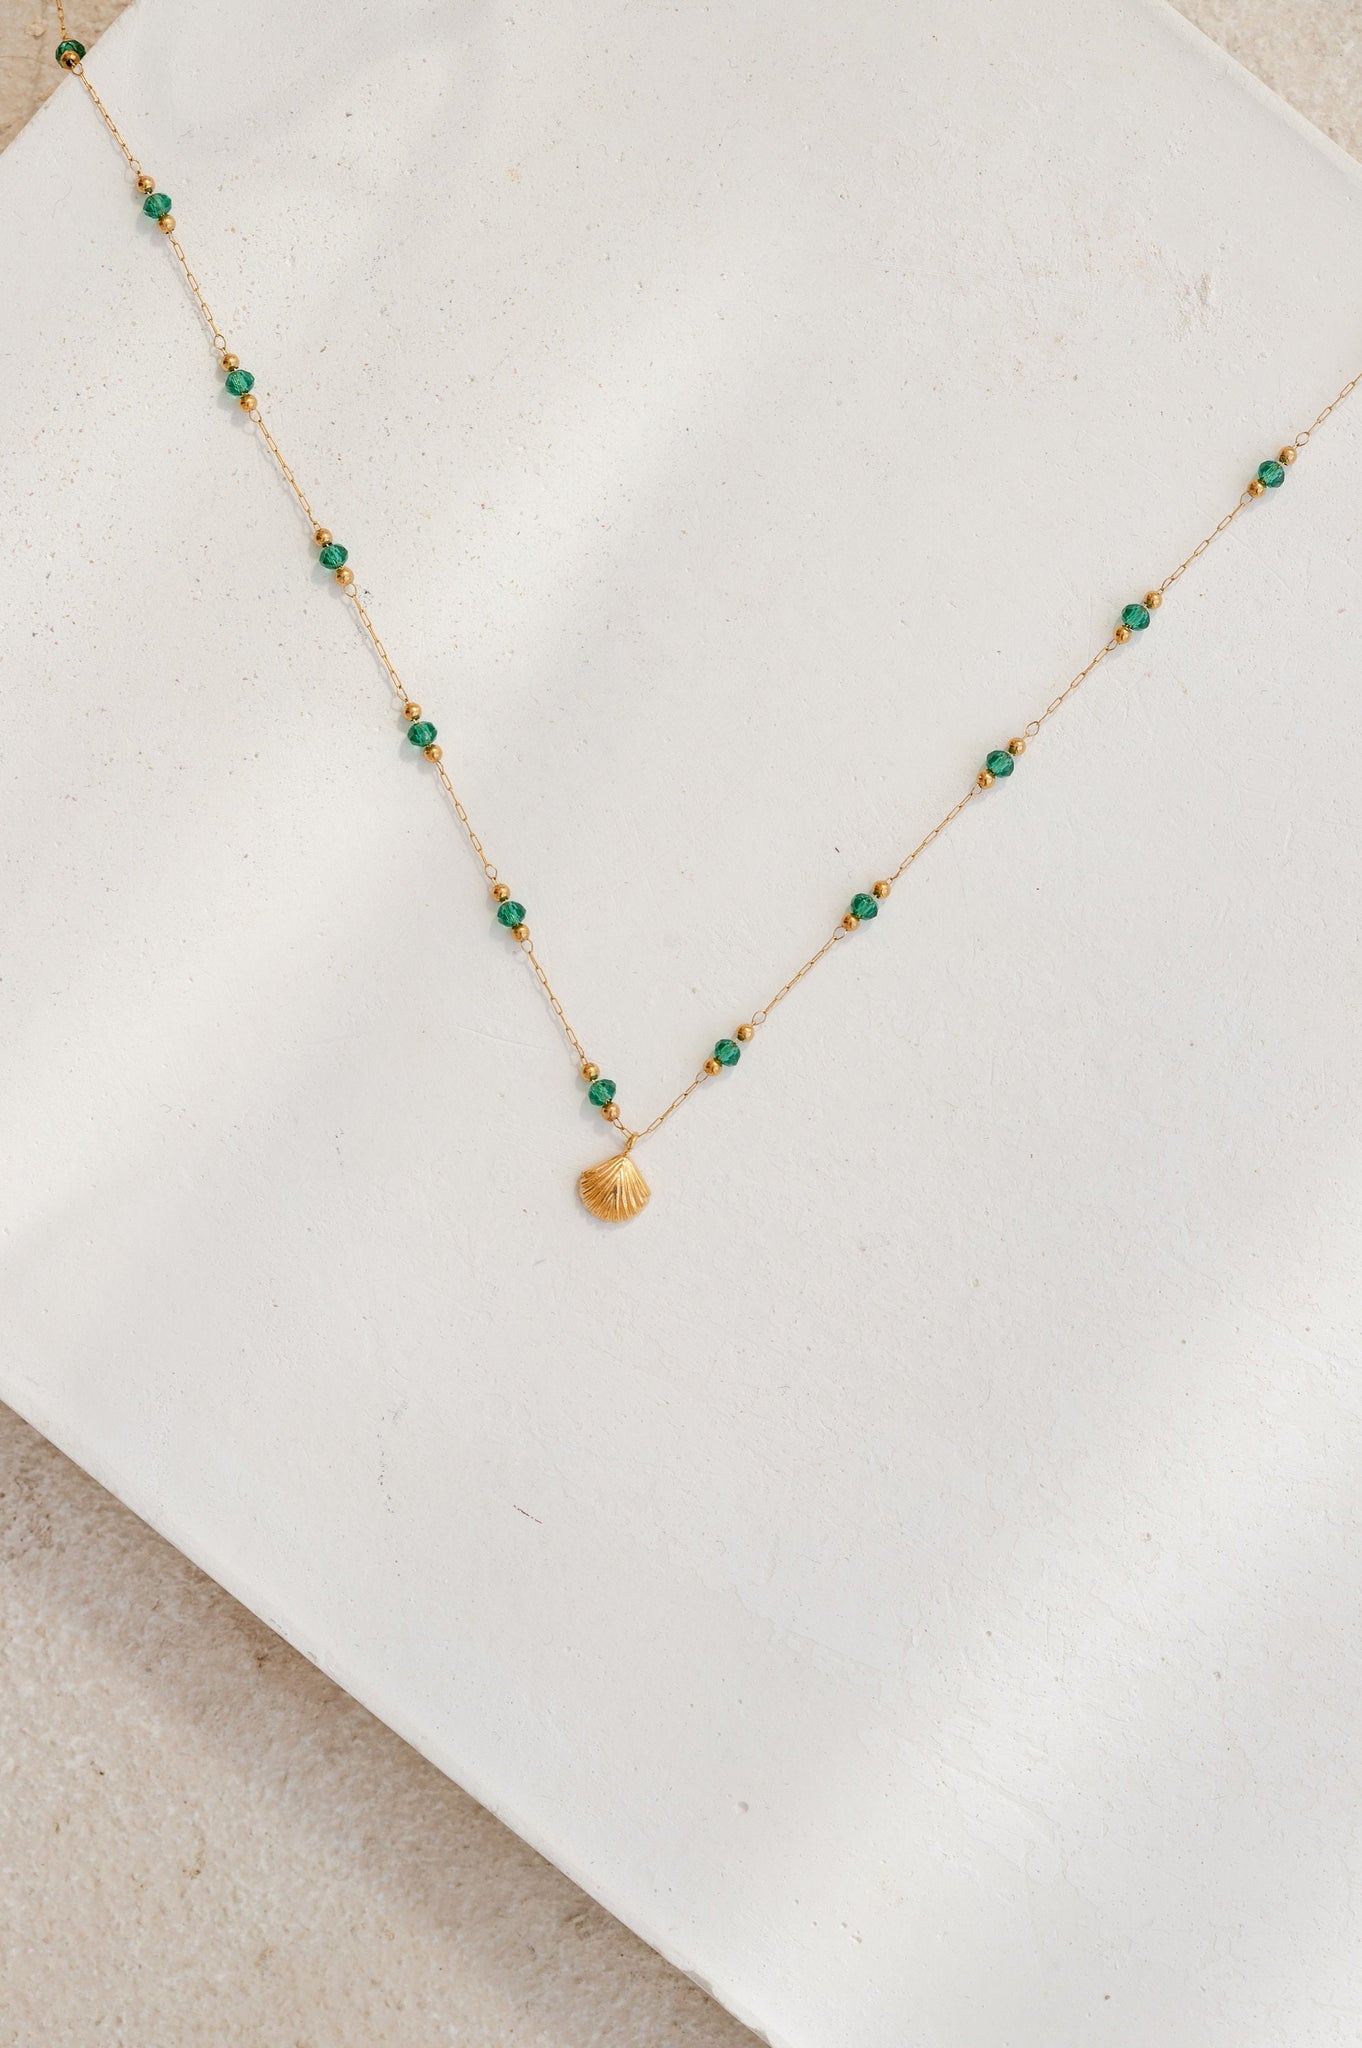 Pendant Necklaces Vintage Luxury Green Stone Beaded Necklace For Women  Alloy Feather Imitation Pearl Clavicle Chain Collar 2021 From Motorlike,  $13.21 | DHgate.Com